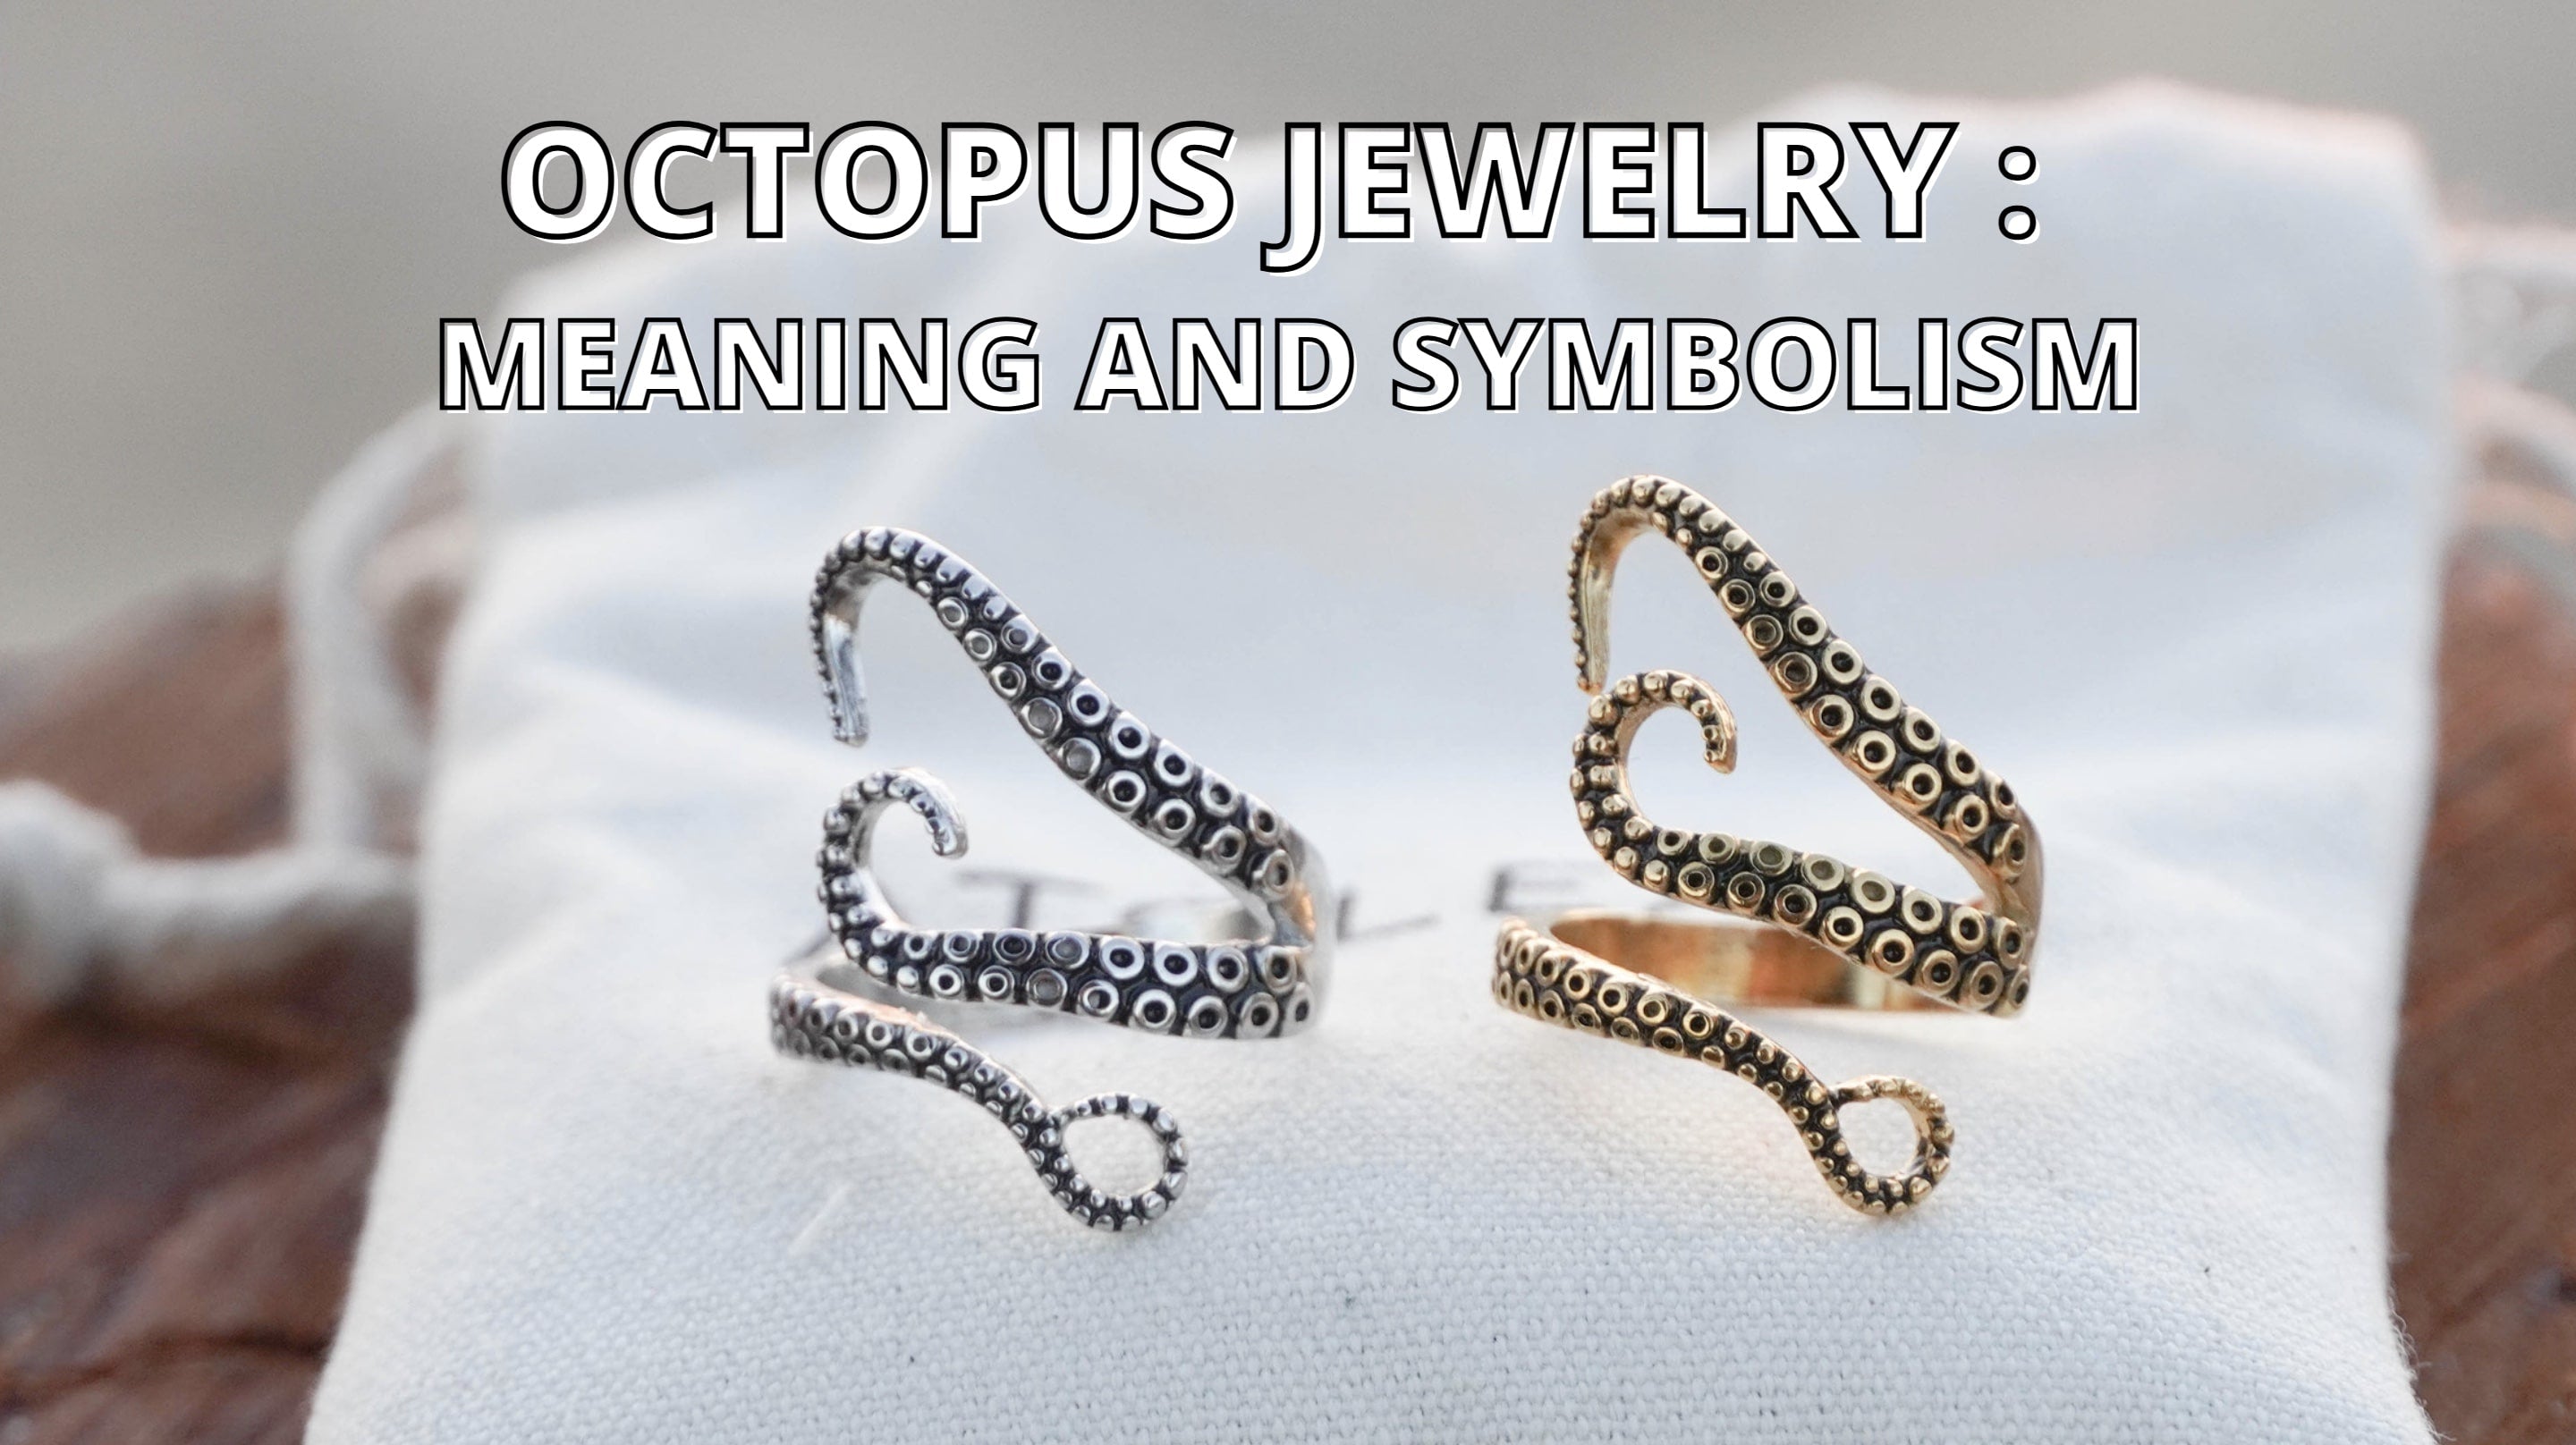 Meaning and Symbolism of Octopus Jewelry